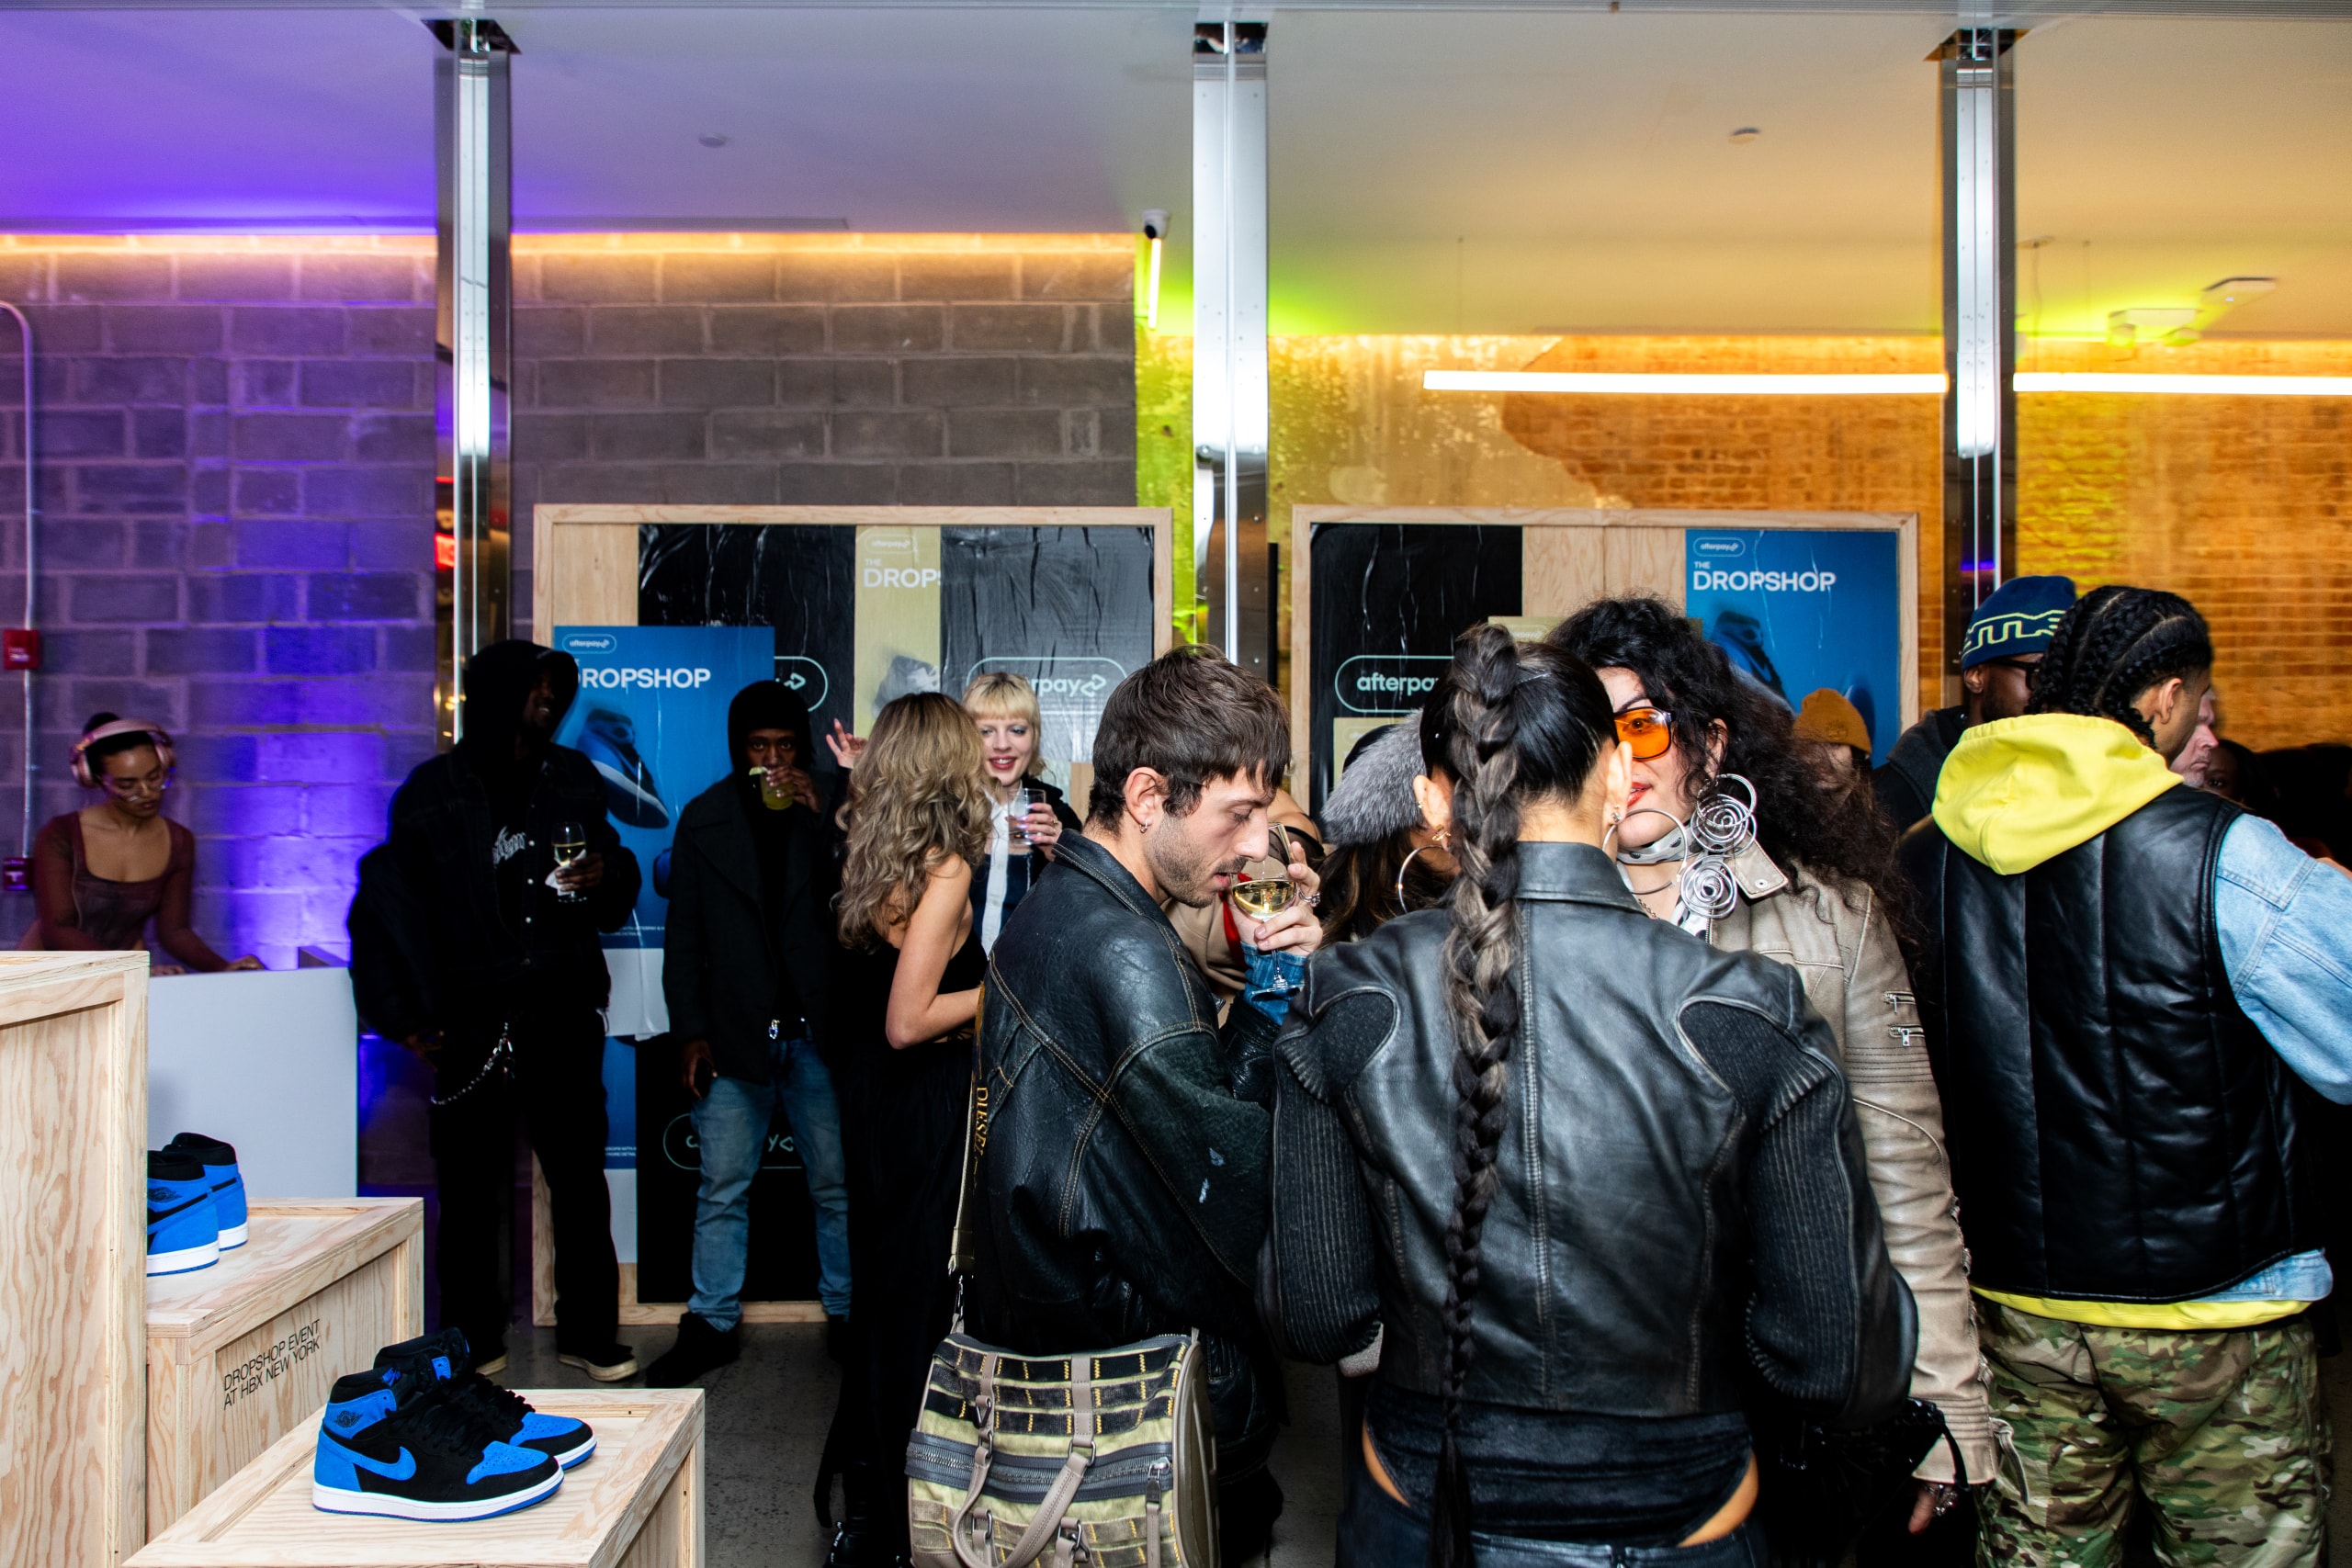 Afterpay Brings Dropshop IRL with Sneaker Event at HBX New York